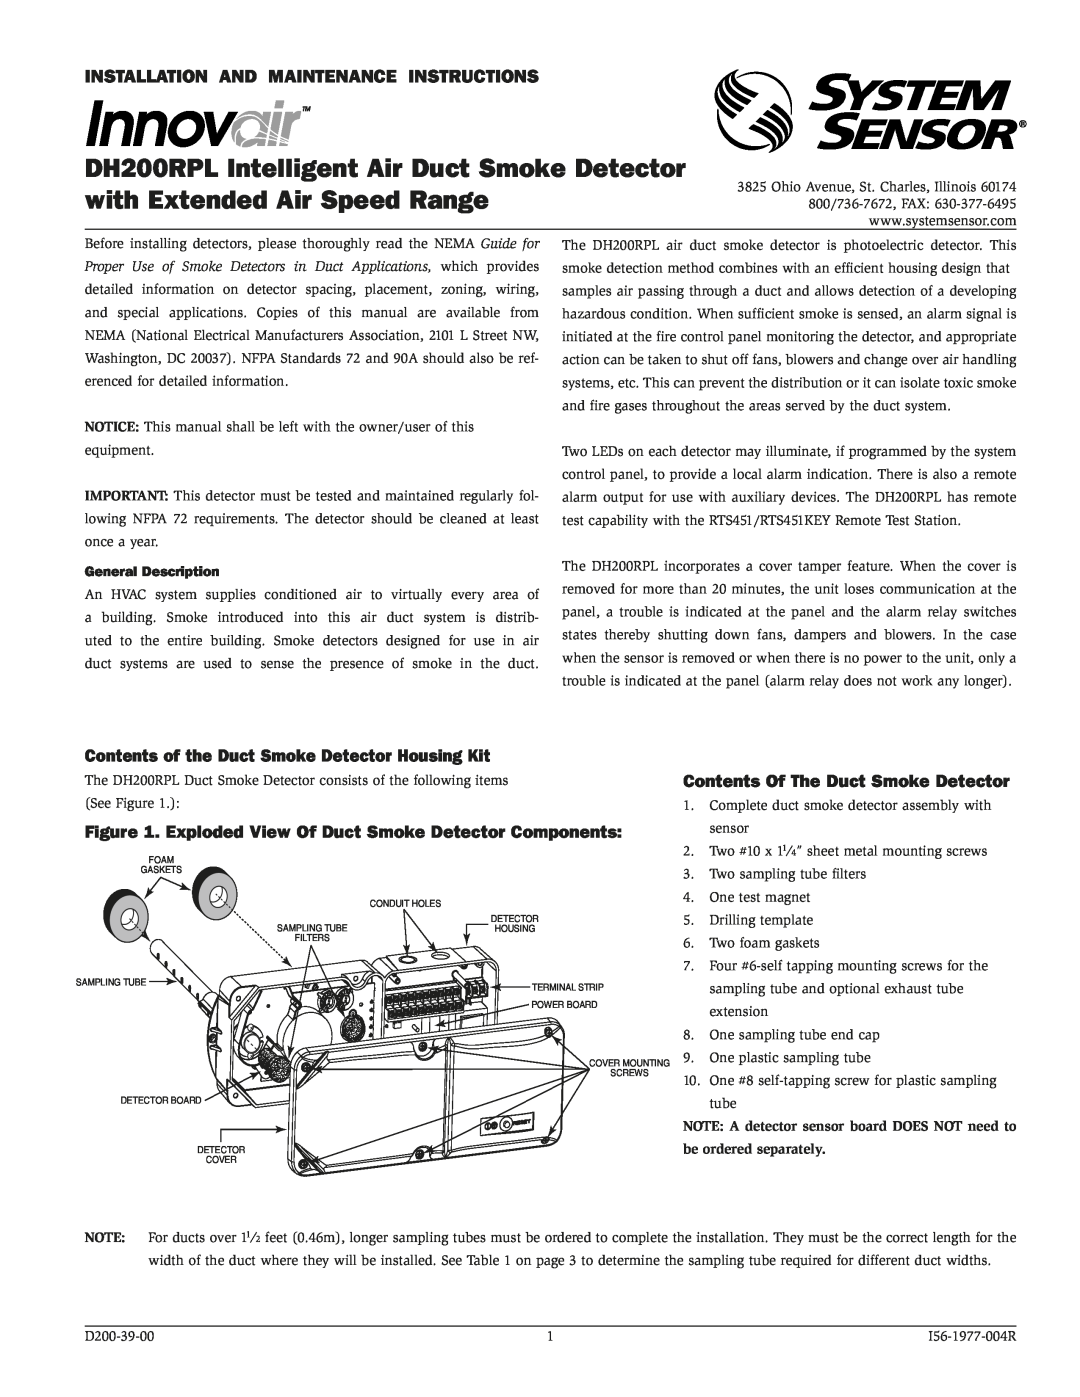 System Sensor DH200RPL manual Contents of the Duct Smoke Detector Housing Kit, General Description 